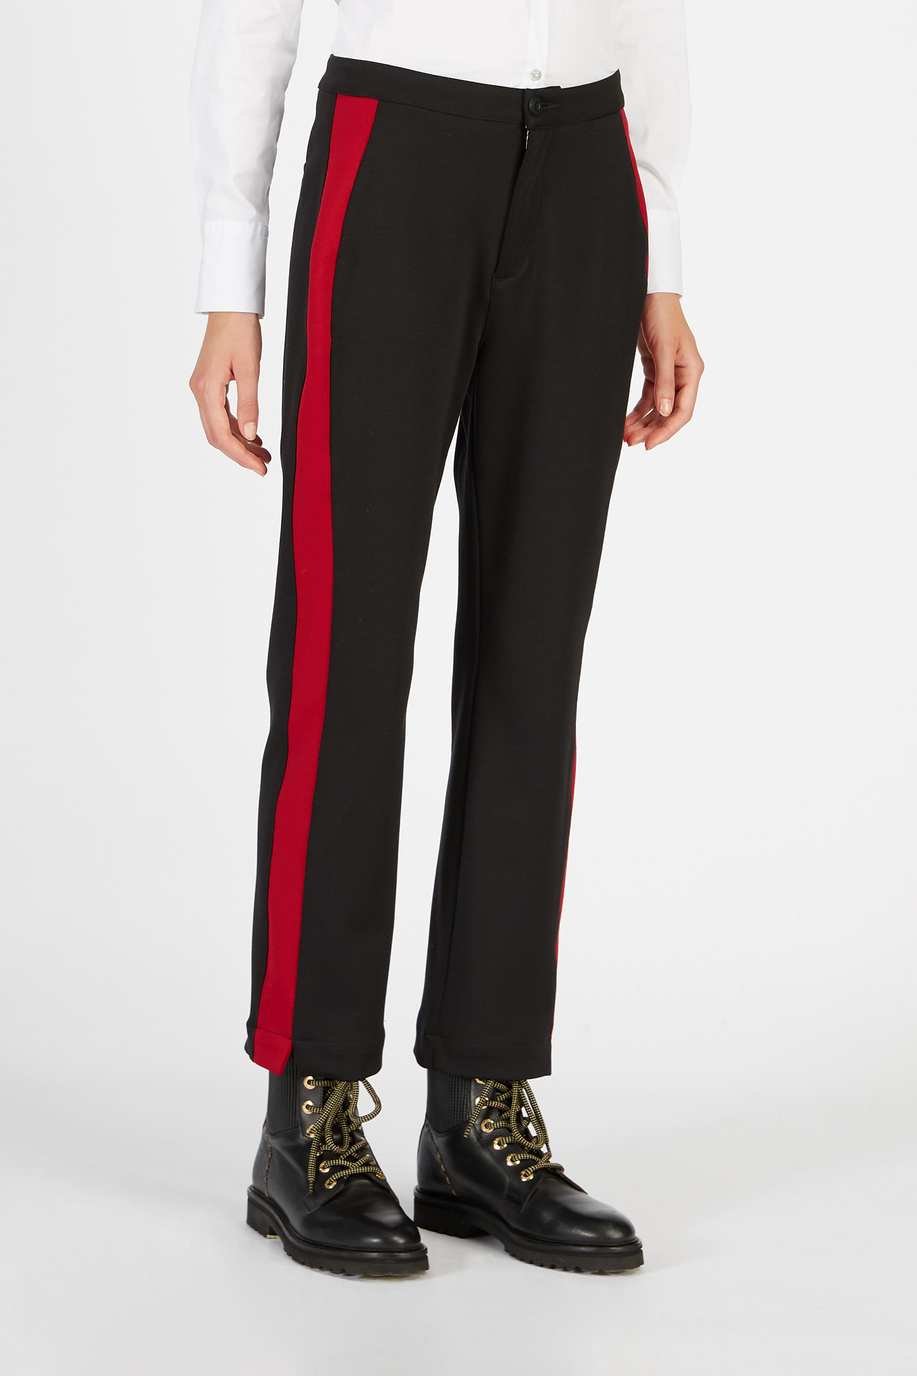 Women’s high-waisted trousers with narrow bottom | La Martina - Official Online Shop